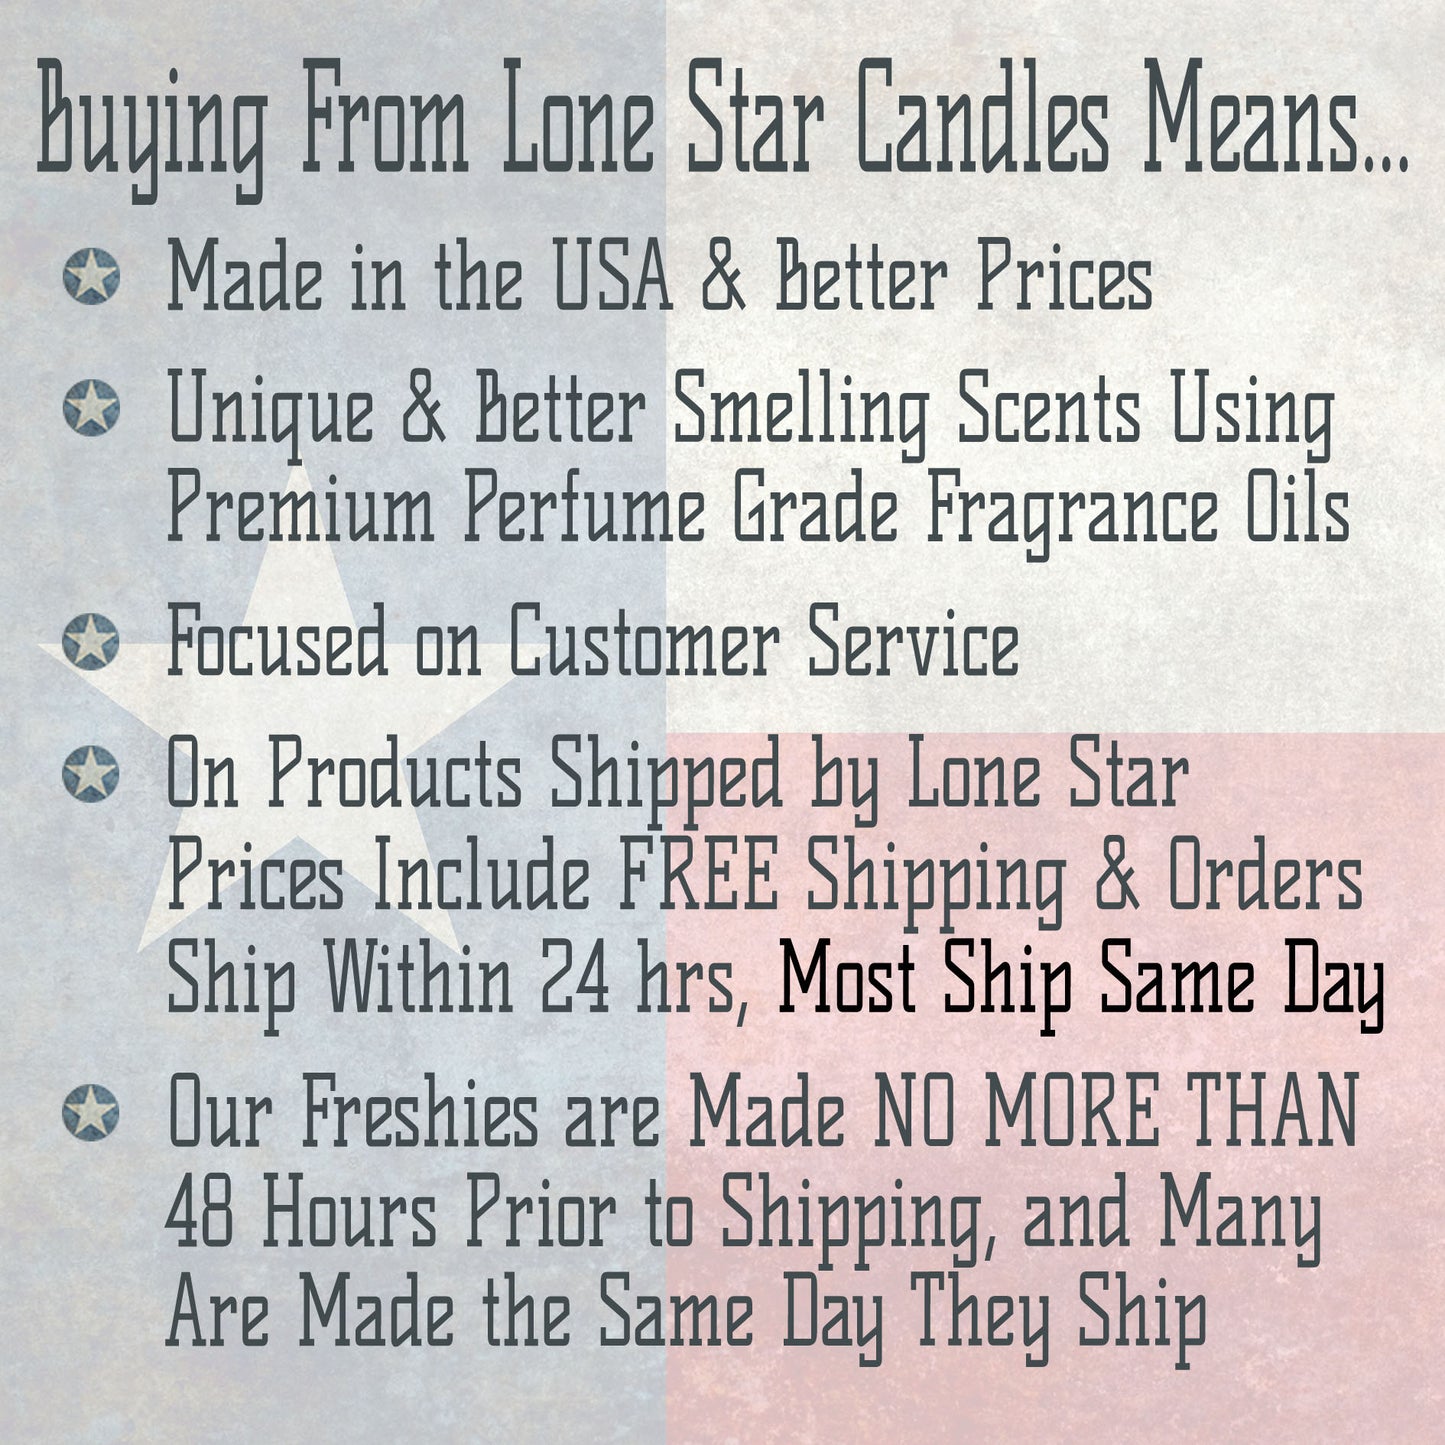 Leather & Lace, Lone Star Candles & More’s Premium Strongly Scented Freshies, Aroma of Genuine Leather and Creamy Vanilla, Car & Air Freshener, USA Made in Texas, Gnome 1-Pack